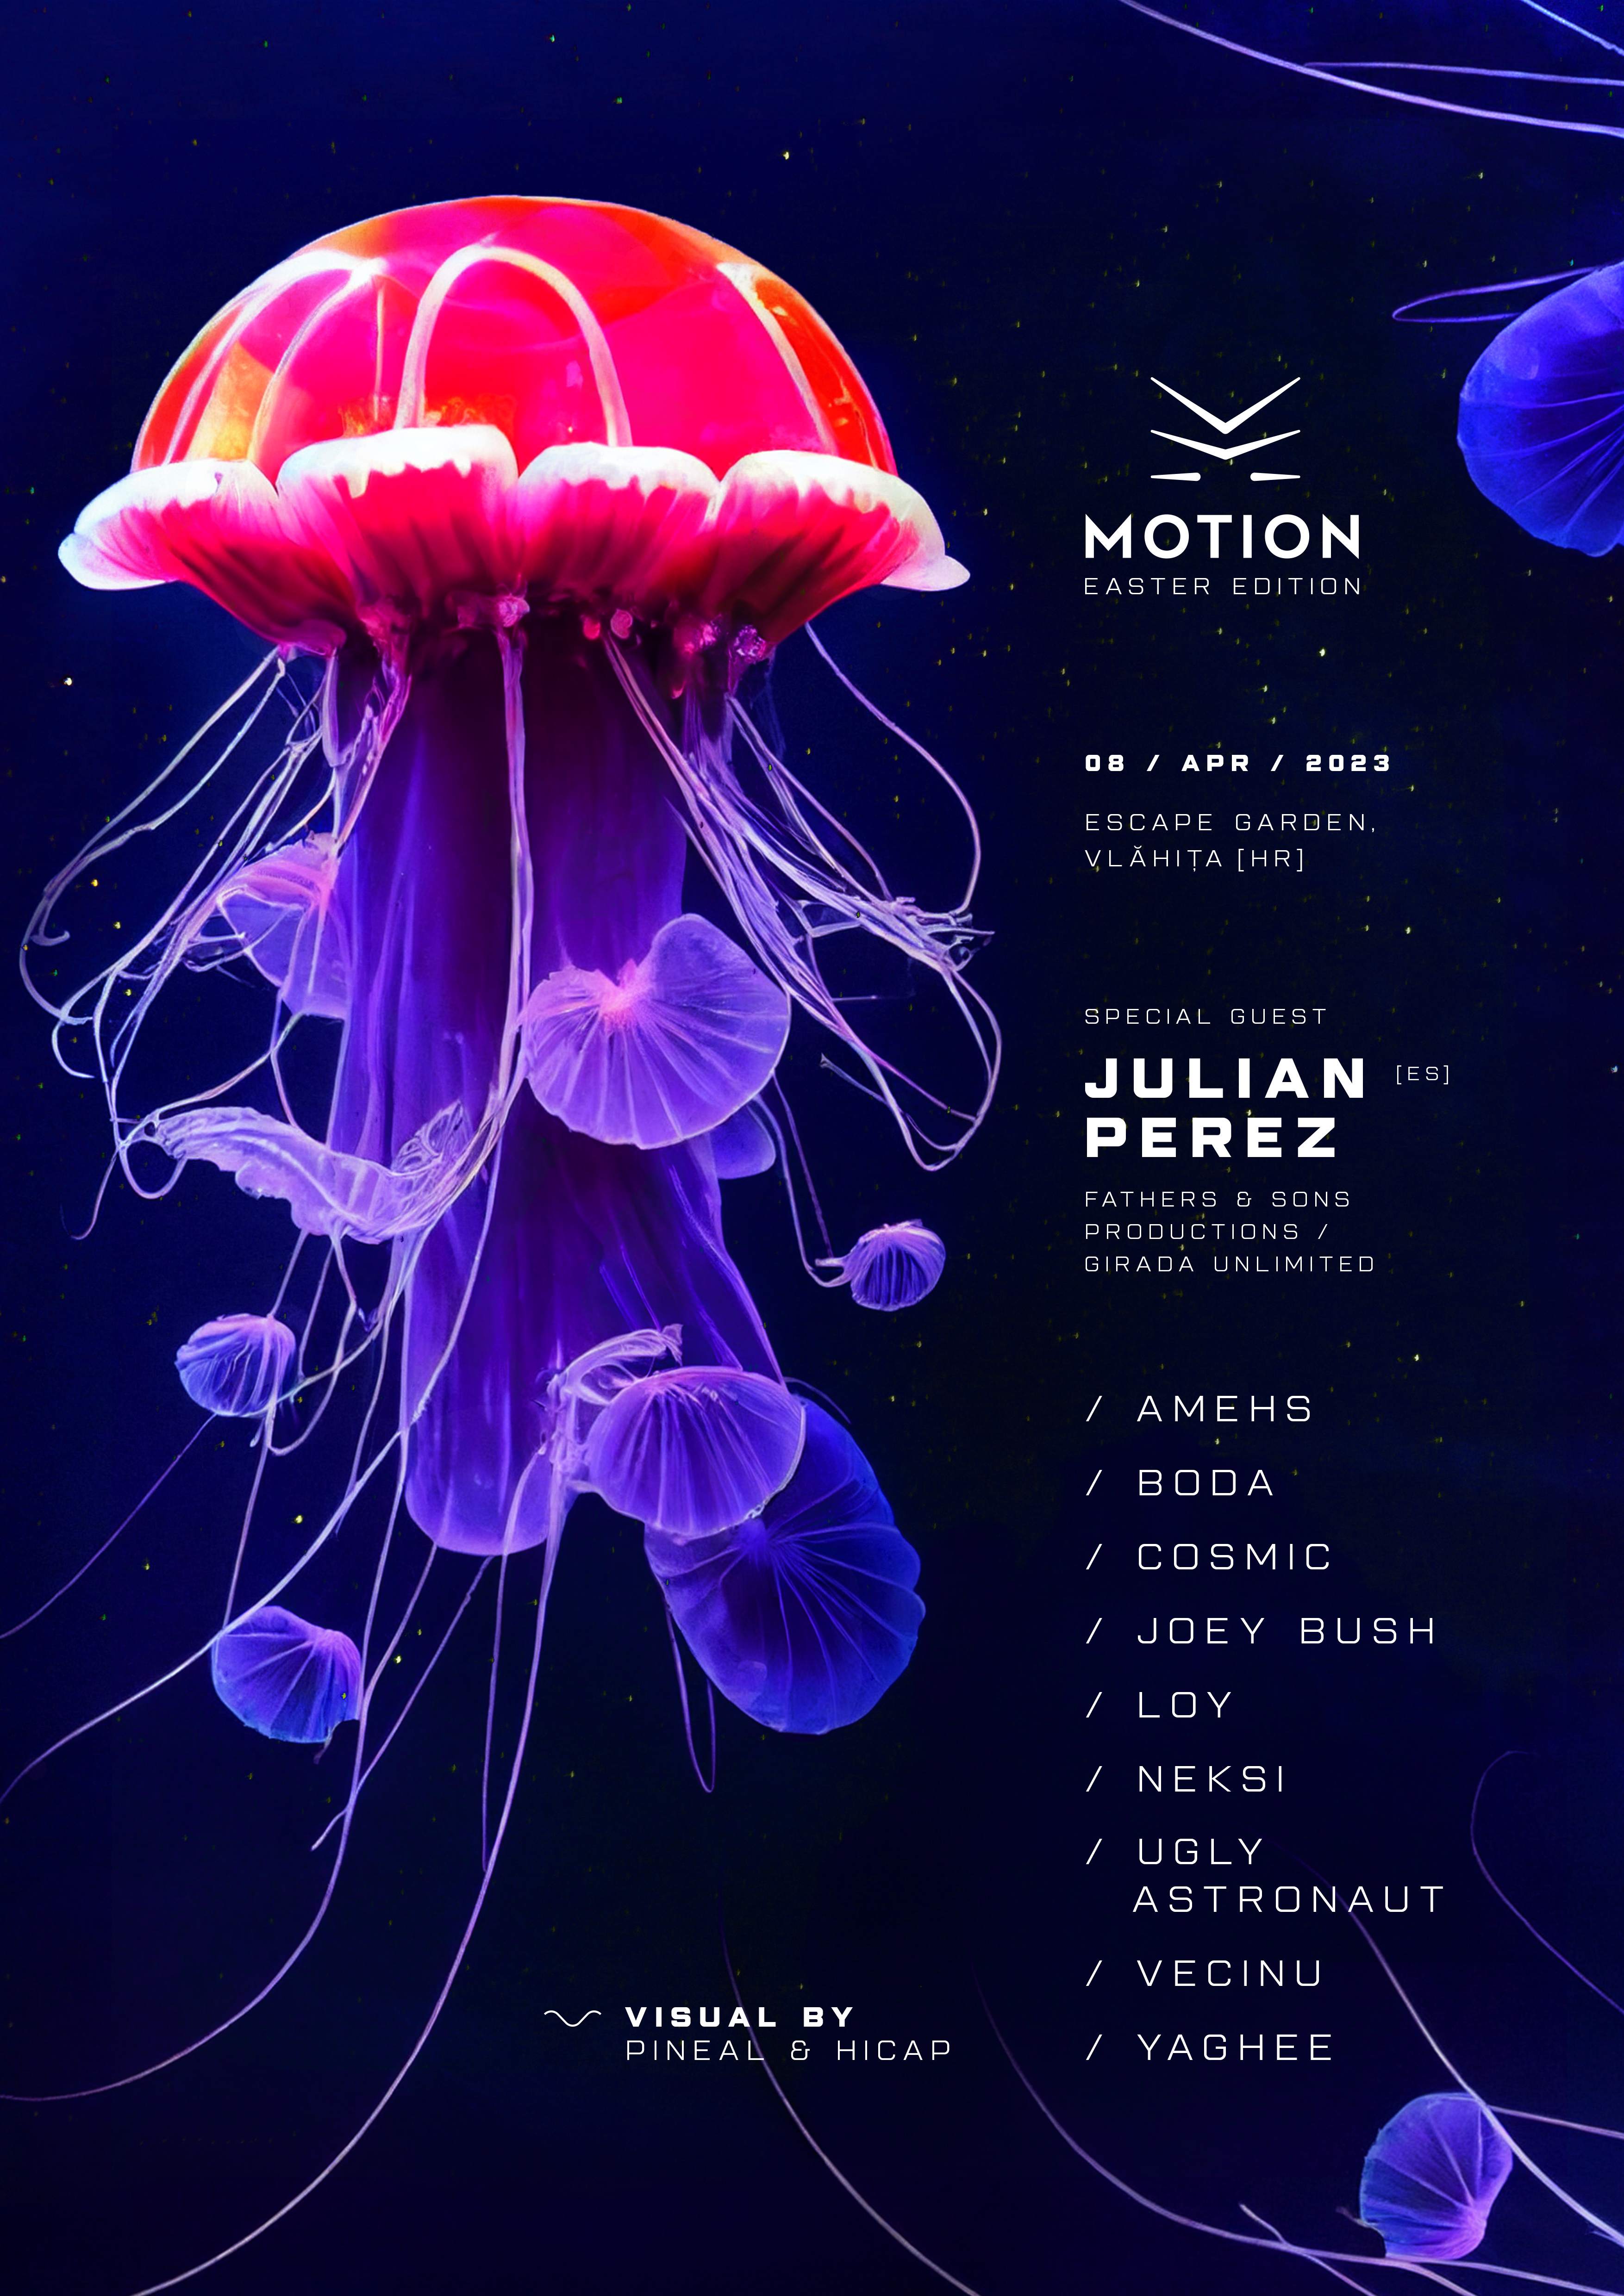 Motion Easter Edition with Julian Perez / LOy - フライヤー表